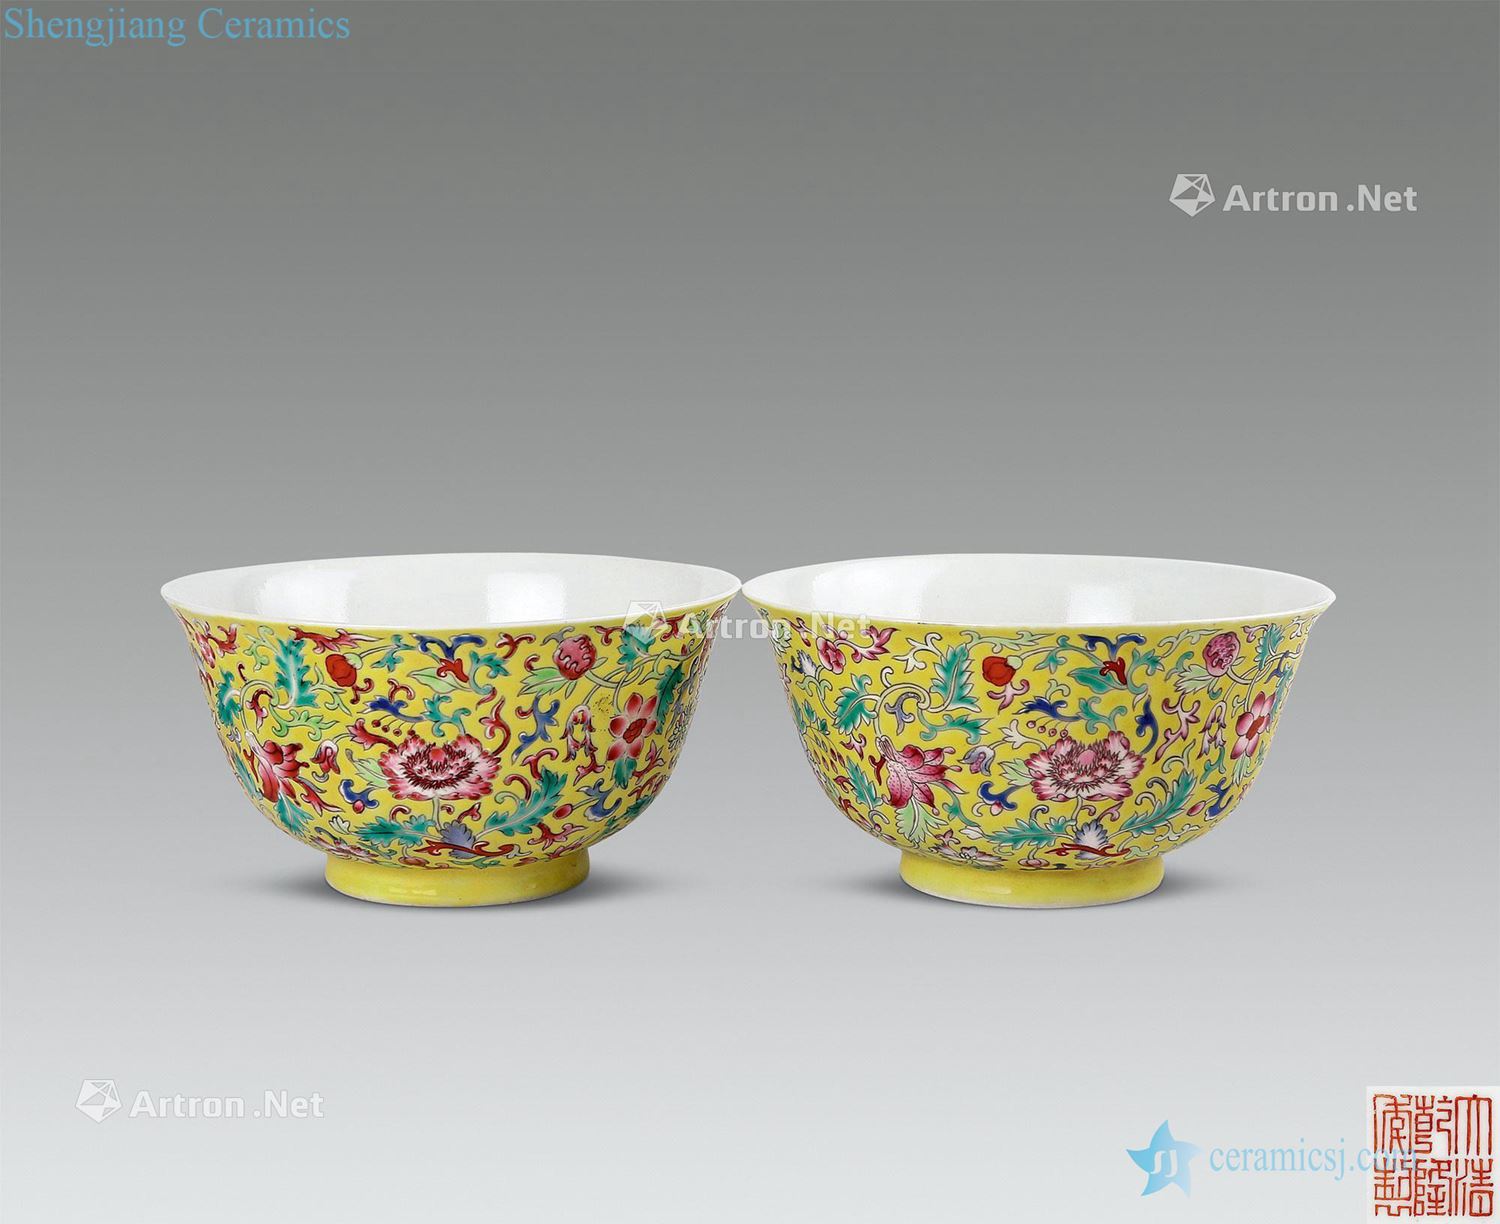 Qianlong to Atlantic ocean colors branches yellow flowers green-splashed bowls (a)